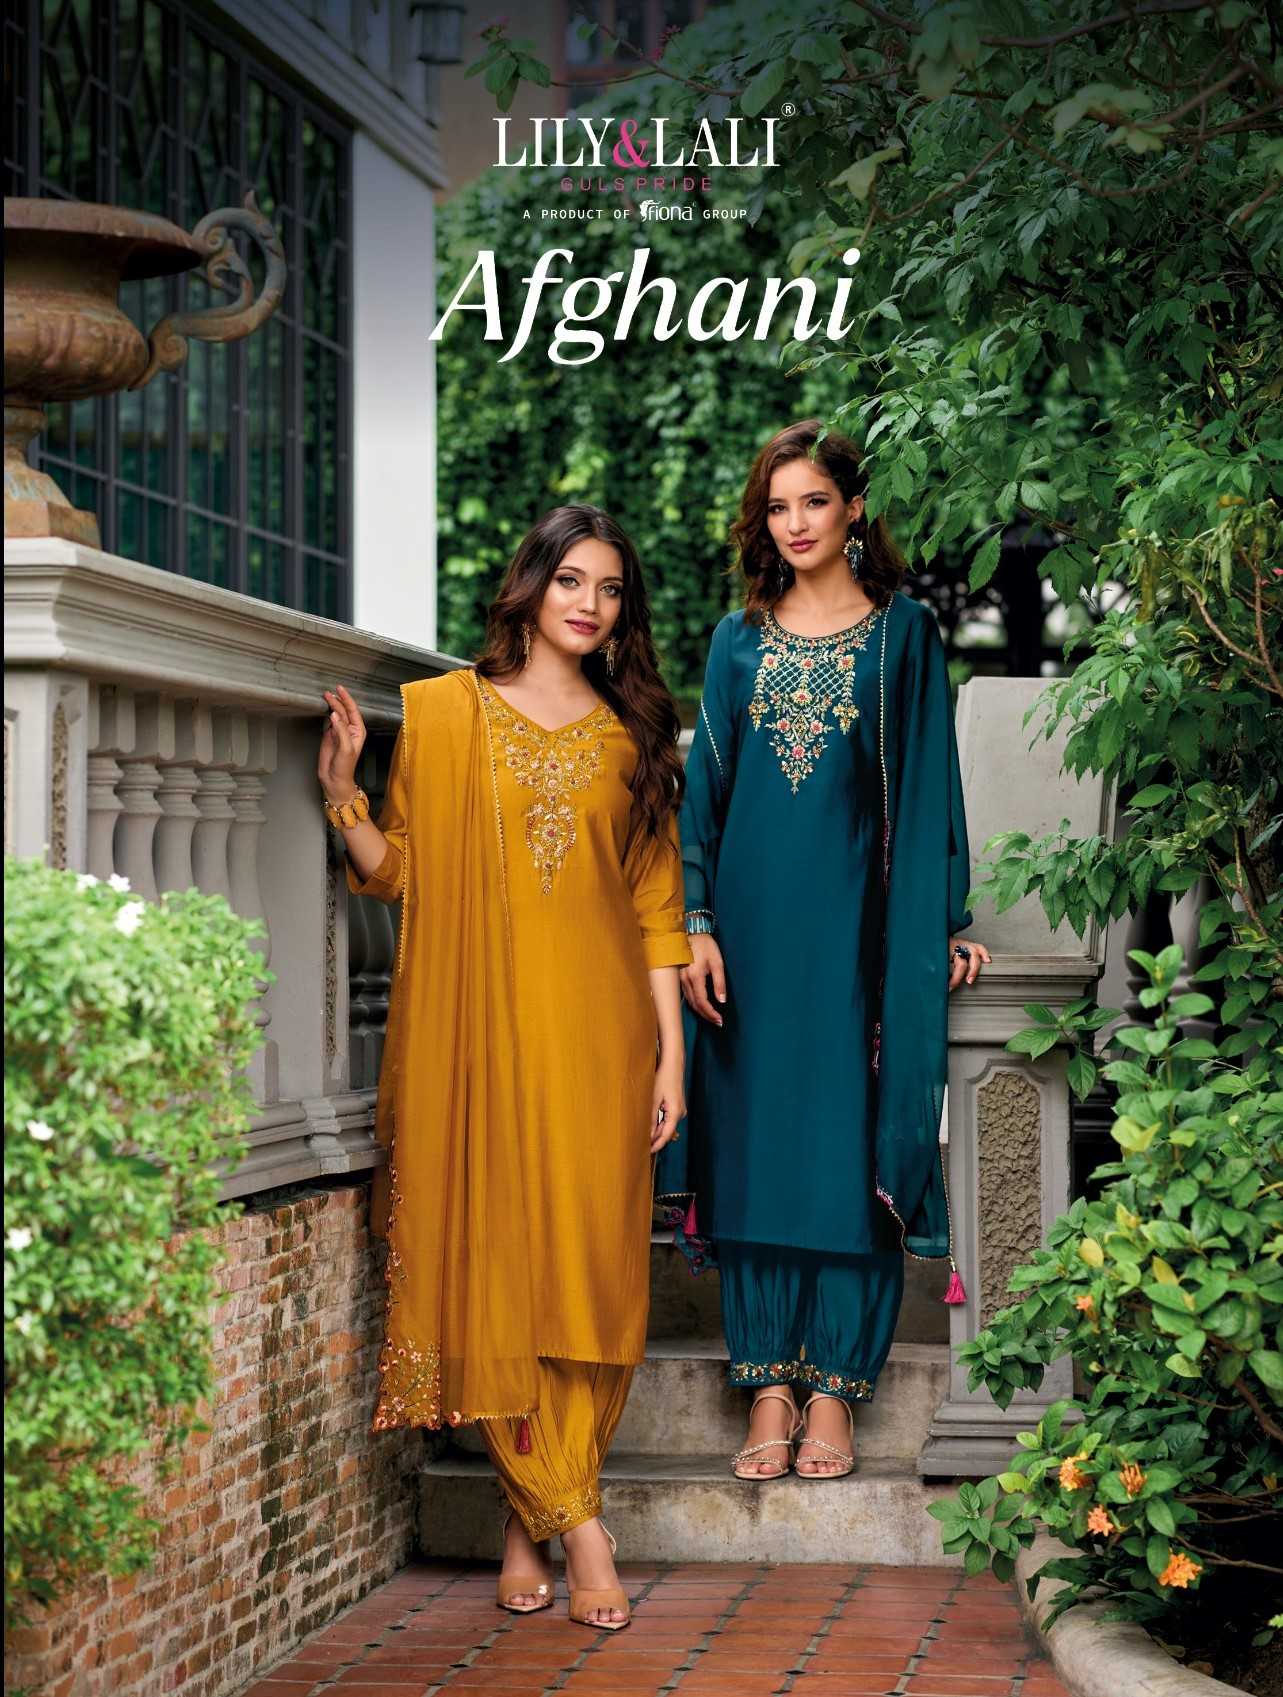 lily and lali present afghani readymade designer handwork salwar suit in afgani style